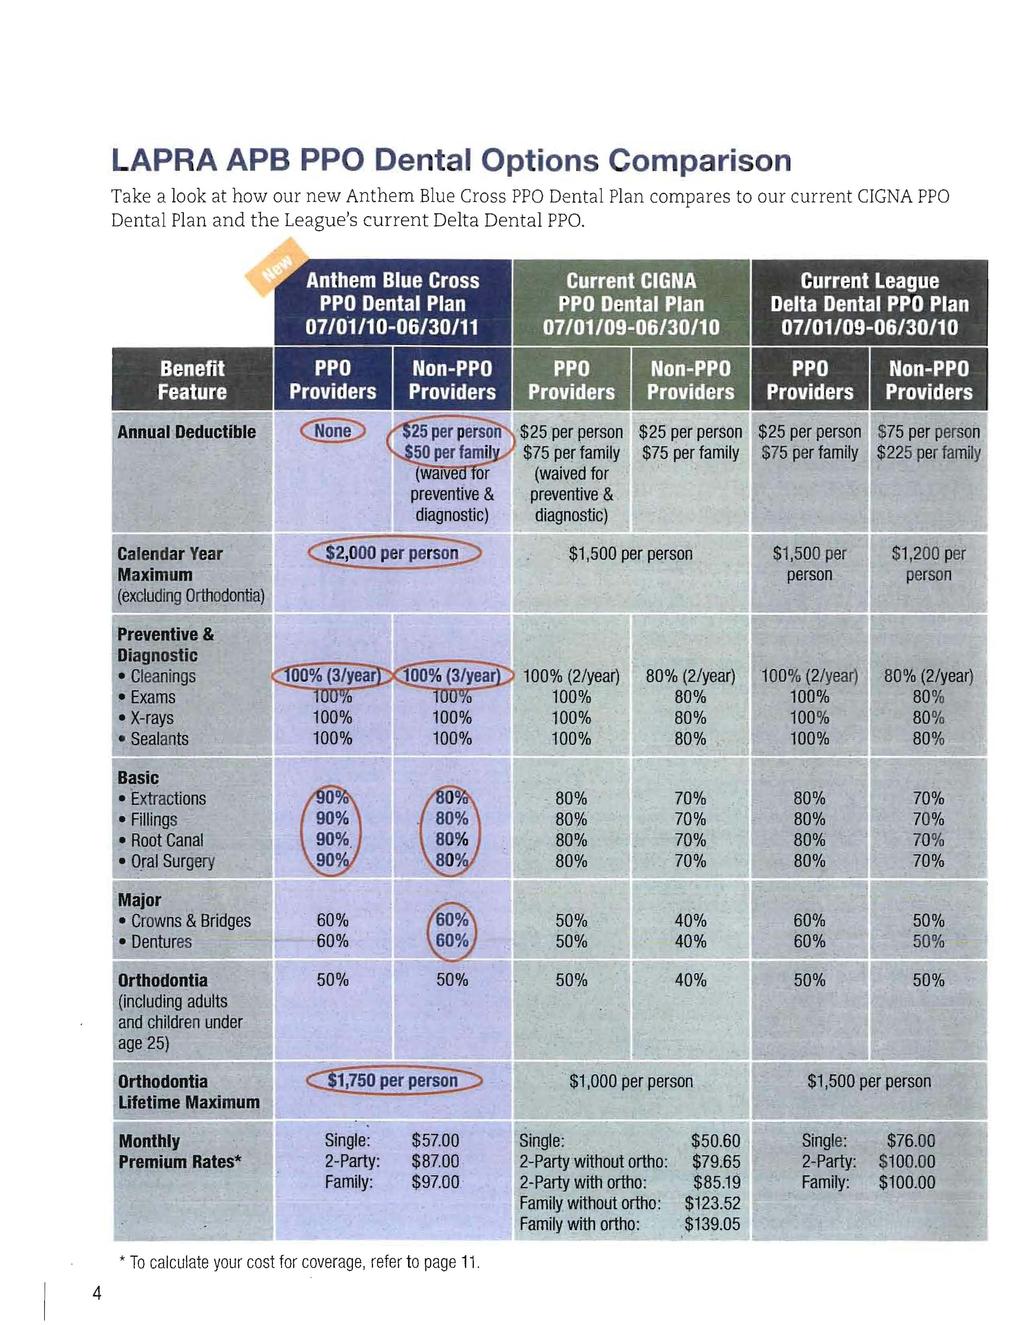 LAPRA APB PPO Dental Options Comparison Take a look at how our new Anthem Blue Cross PPO Dental Plan compares to our current ClGNA PPO Dental Plan and the League's current Delta Dental PPO.